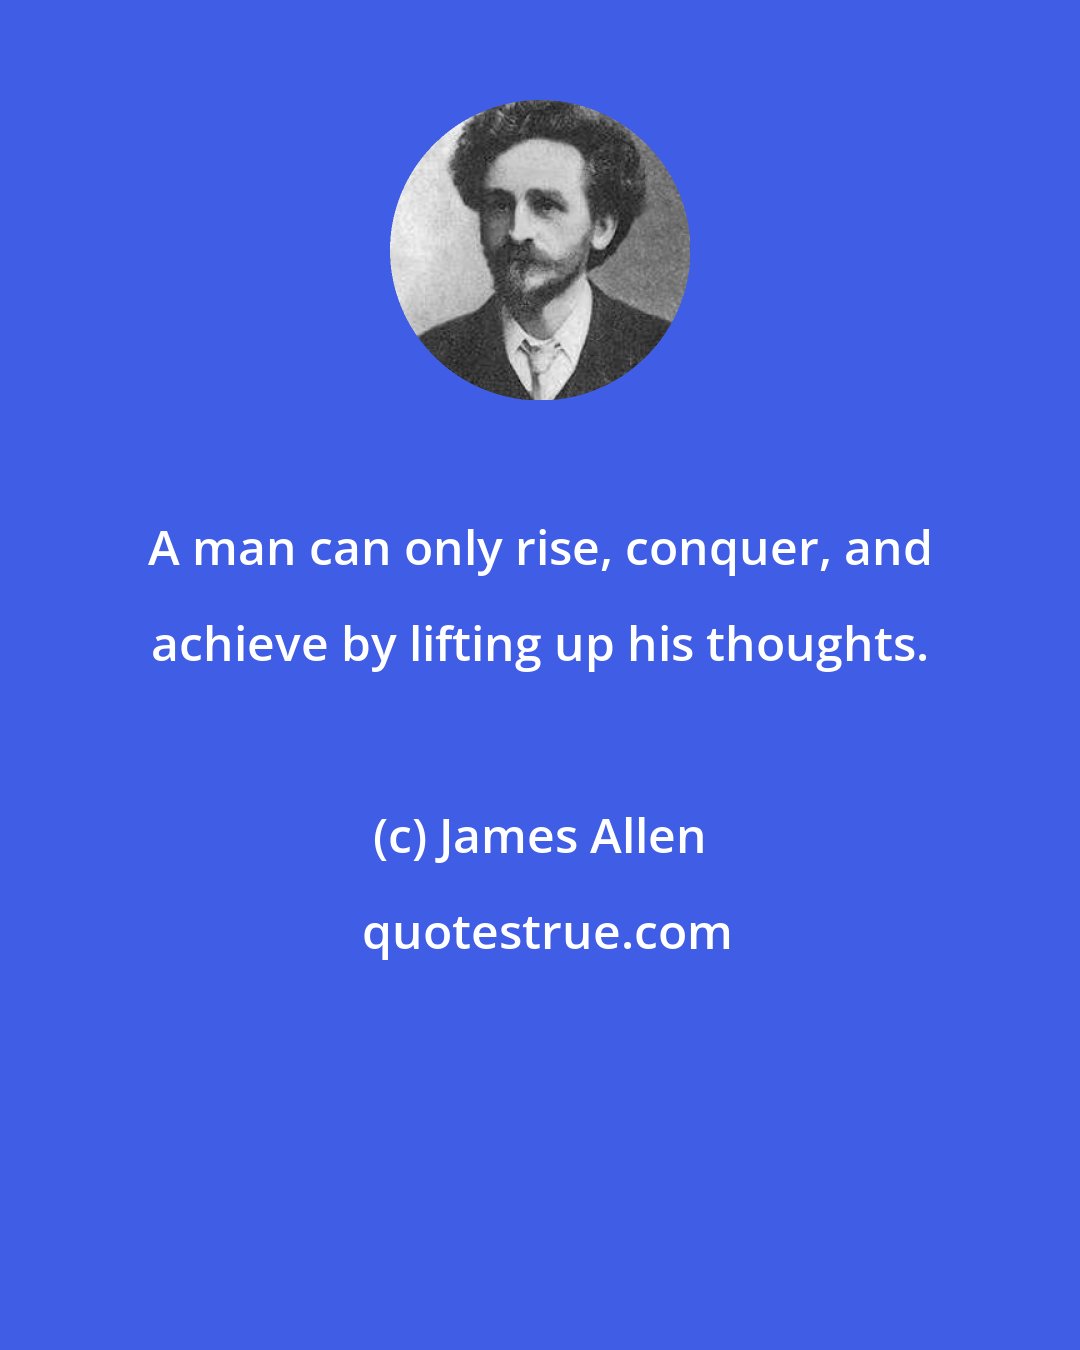 James Allen: A man can only rise, conquer, and achieve by lifting up his thoughts.